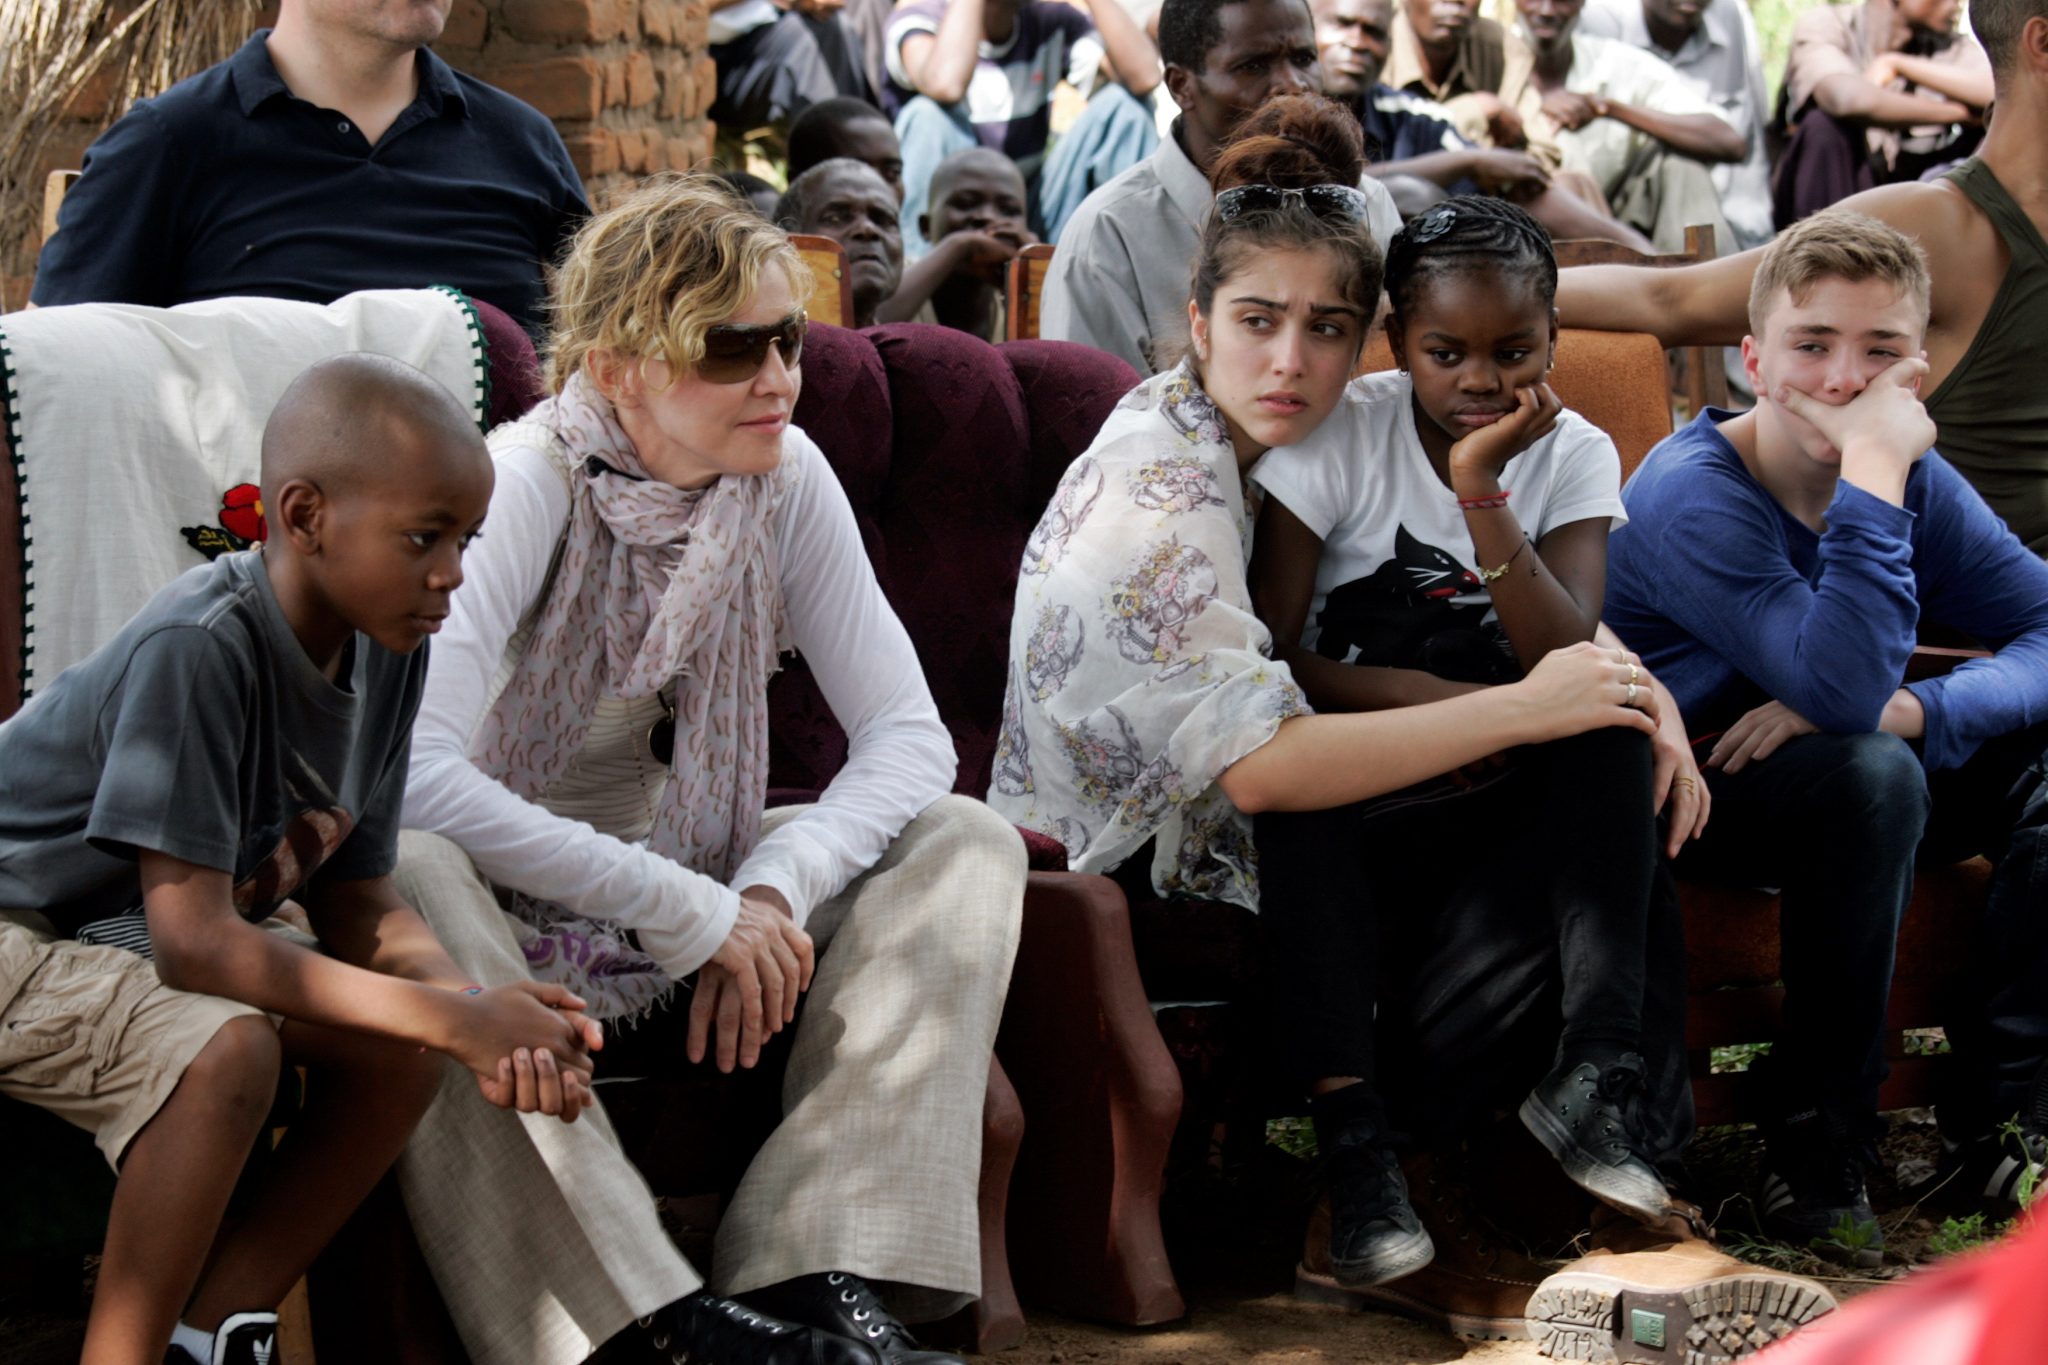 (FILES) This file photo taken on April 2, 2013 shows US Pop Star Madonna (2nd L) sitting with her biological and adopted children (L to R) David Banda, Lourdes, Mercy James, and Rocco at Mkoko Primary School, one of the schools Madonna's Raising Malawi organization has built jointly with US organization BuildOn, during a visit in the region of Kasungu, central Malawi.  A court in Malawi on February 7, 2017 approved Madonna's request to adopt two four-year-old twin girls, adding to the two other children that the US pop superstar adopted previously from the country. / AFP PHOTO / AMOS GUMULIRA